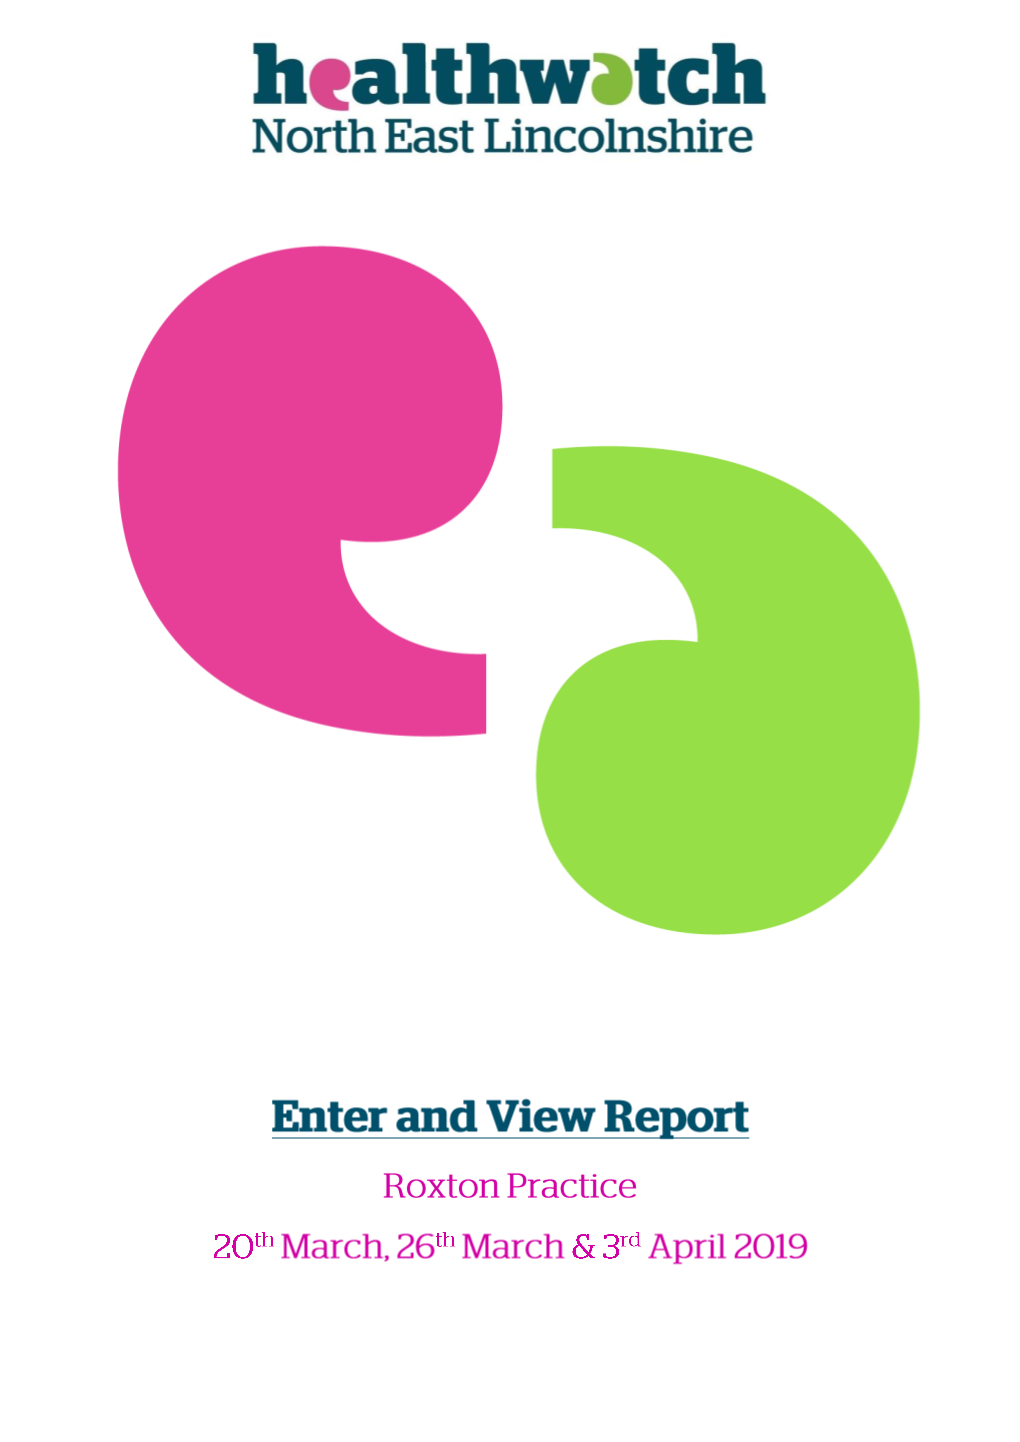 To View the Enter & View Report